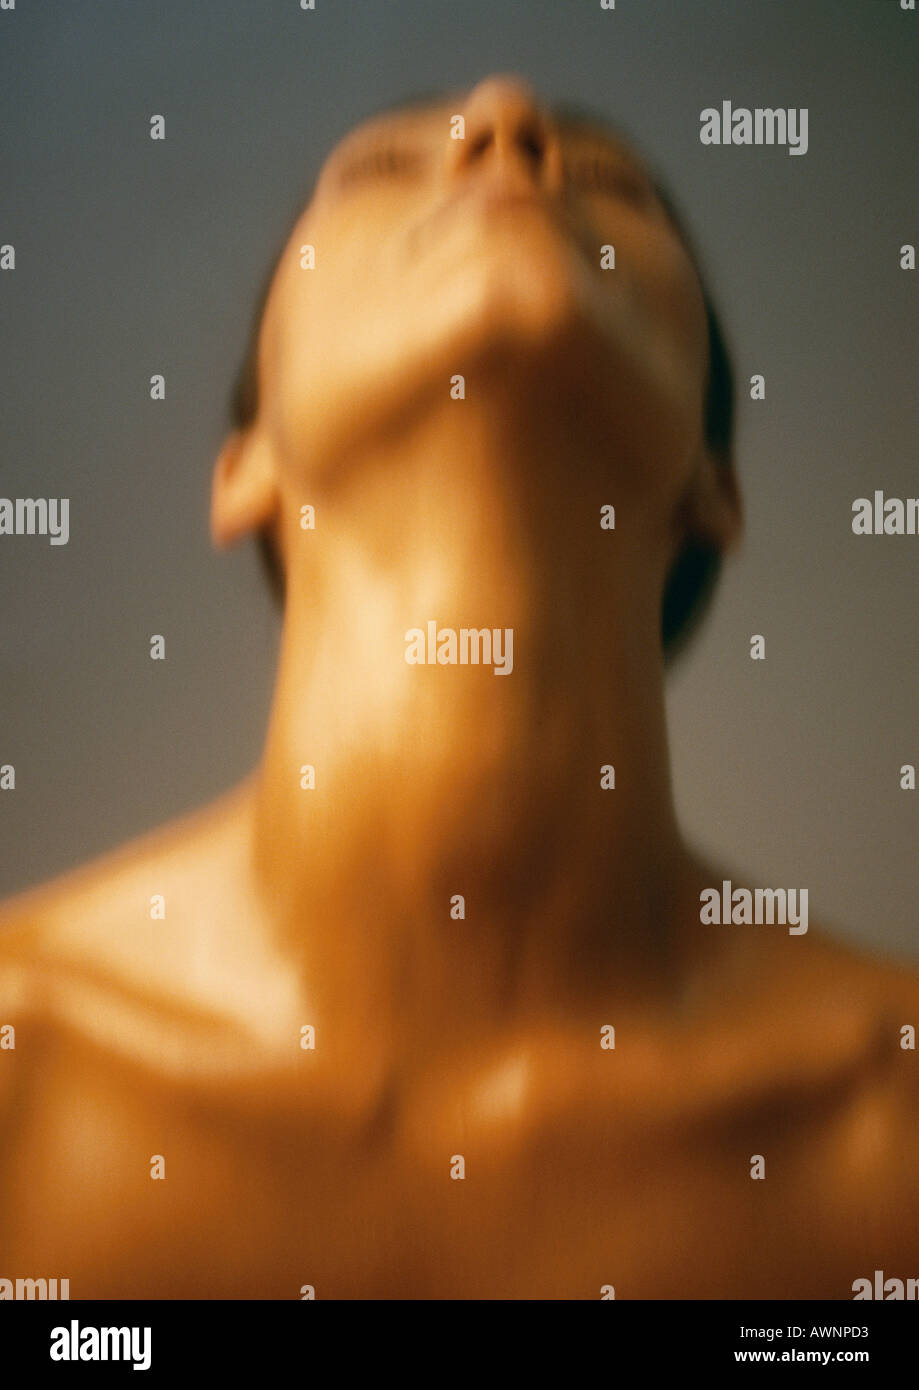 Nude woman with head back, close-up, blurred Banque D'Images